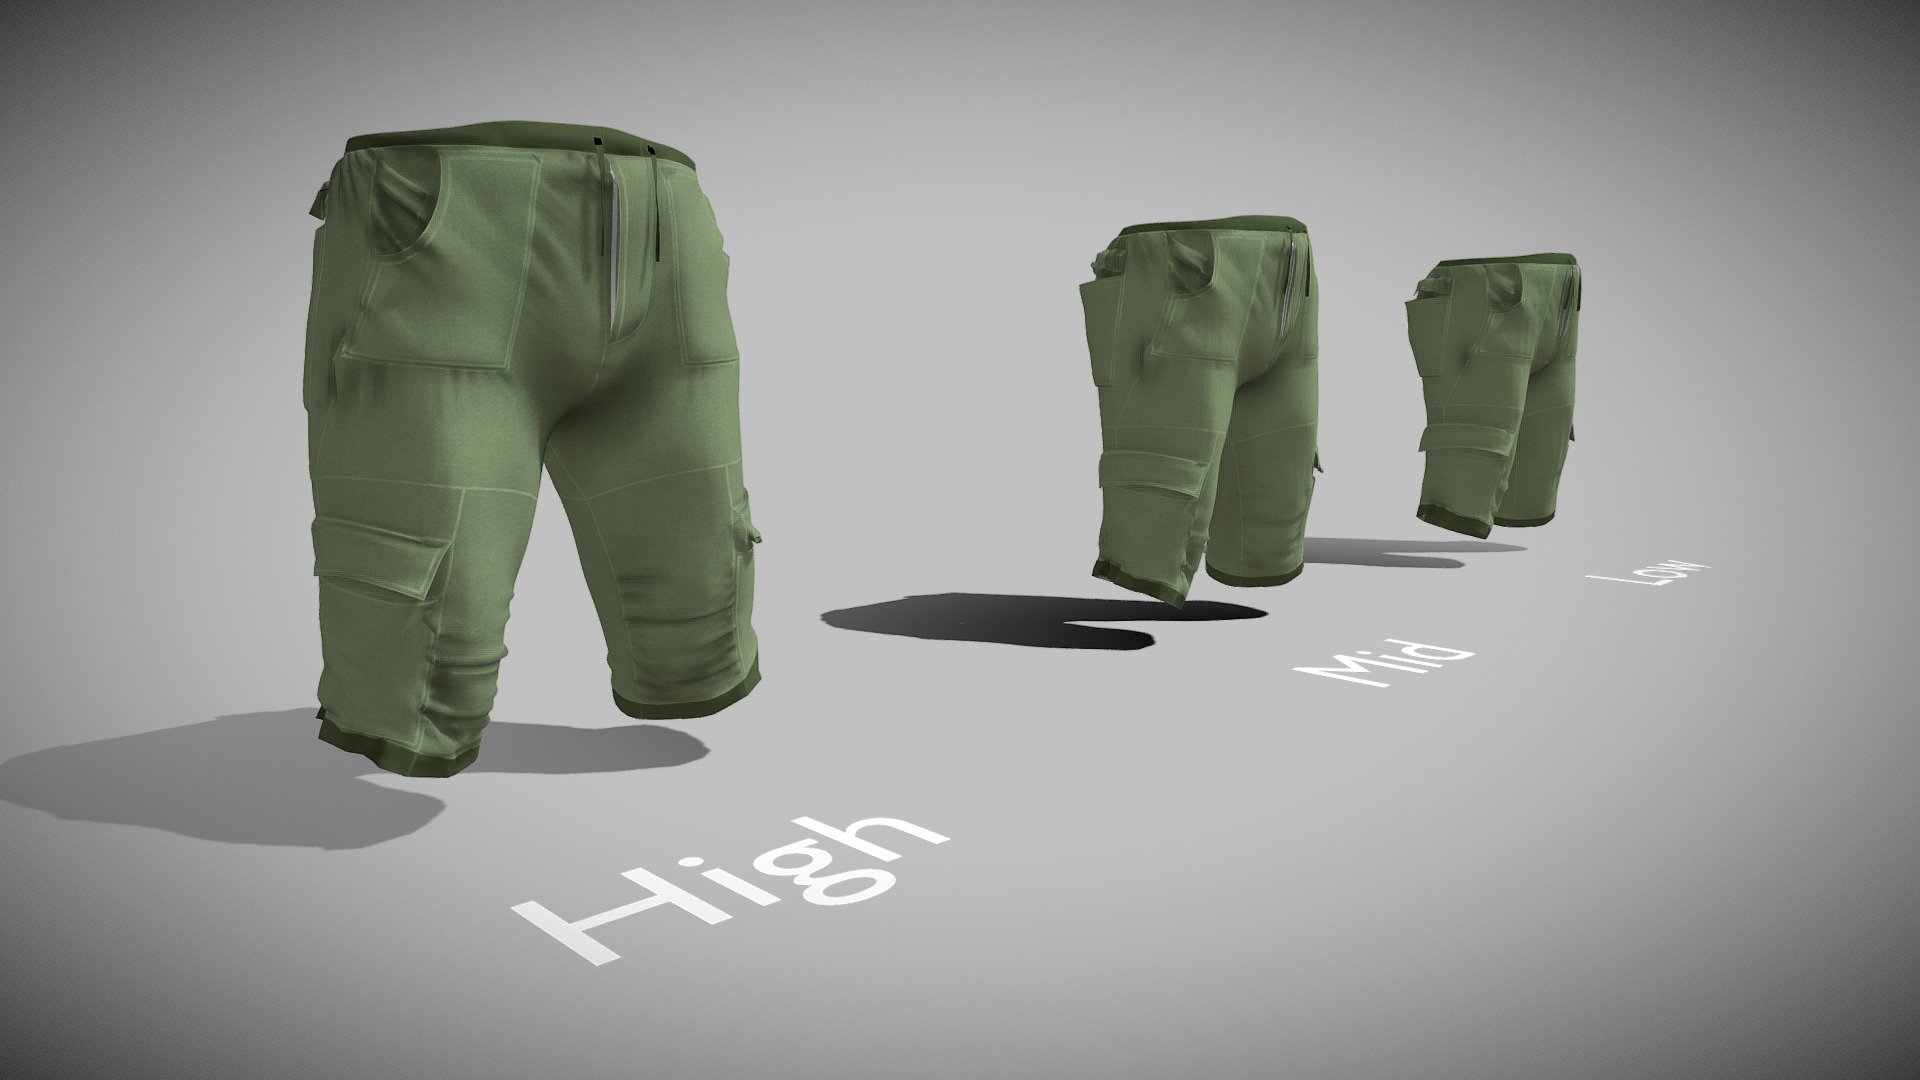 Cargo Shorts made in marvelous designer and reworked in blender. This model comes in quad topology with a variety of file format! Alembic, FBX, OBJ, Blend, Gltf, Stl with 3 Level of details!

All the Marvelous Designer files are available in the archive.

This model is available in 3 levels of detail!

LowPoly: Verts: 71098 Tris: 105768 Mid: Verts: 114316 Tris:176356 High: Verts: 222014 Tris:355448

All my models are made with love for you to enjoy! Cheers! - Cargo Shorts - Buy Royalty Free 3D model by DGNS (@GuillaumeDGNS) 3d model